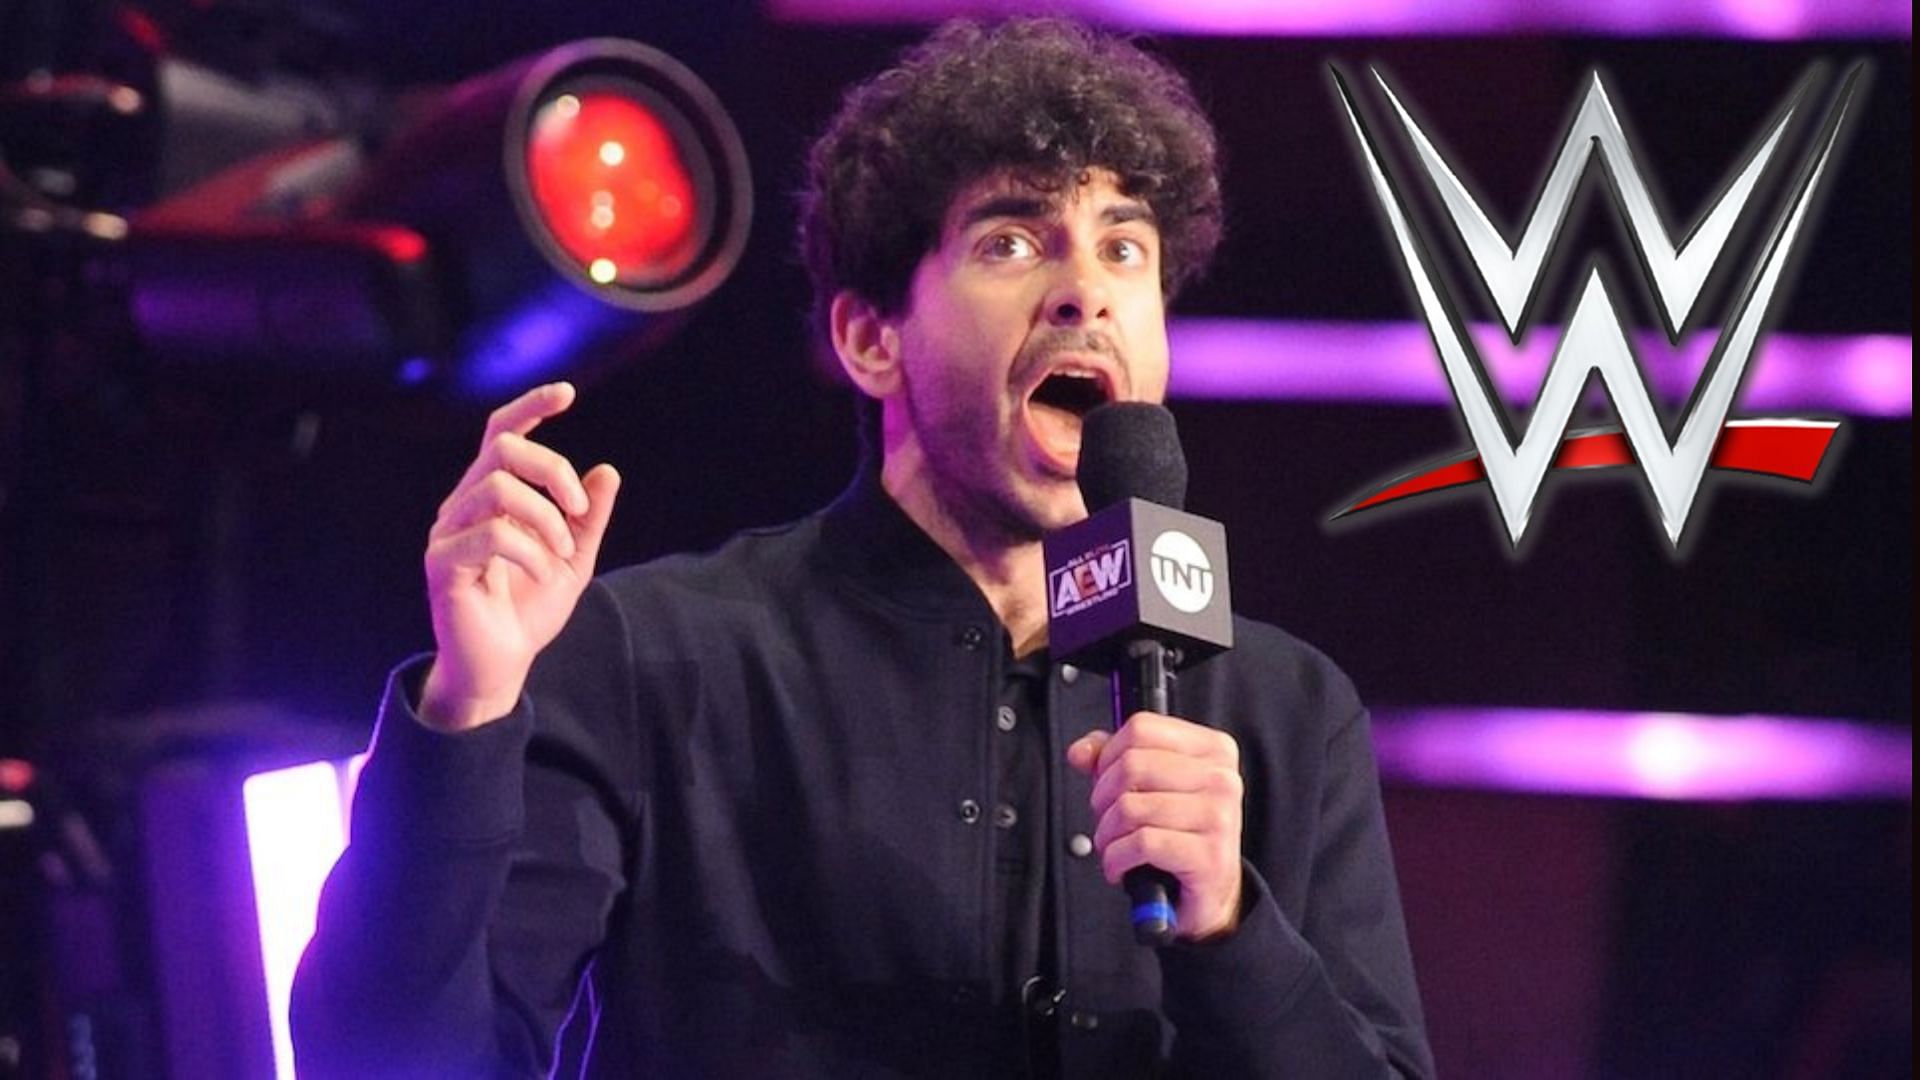 Tony Khan apparently had a hand in nixed plans for a WWE legend